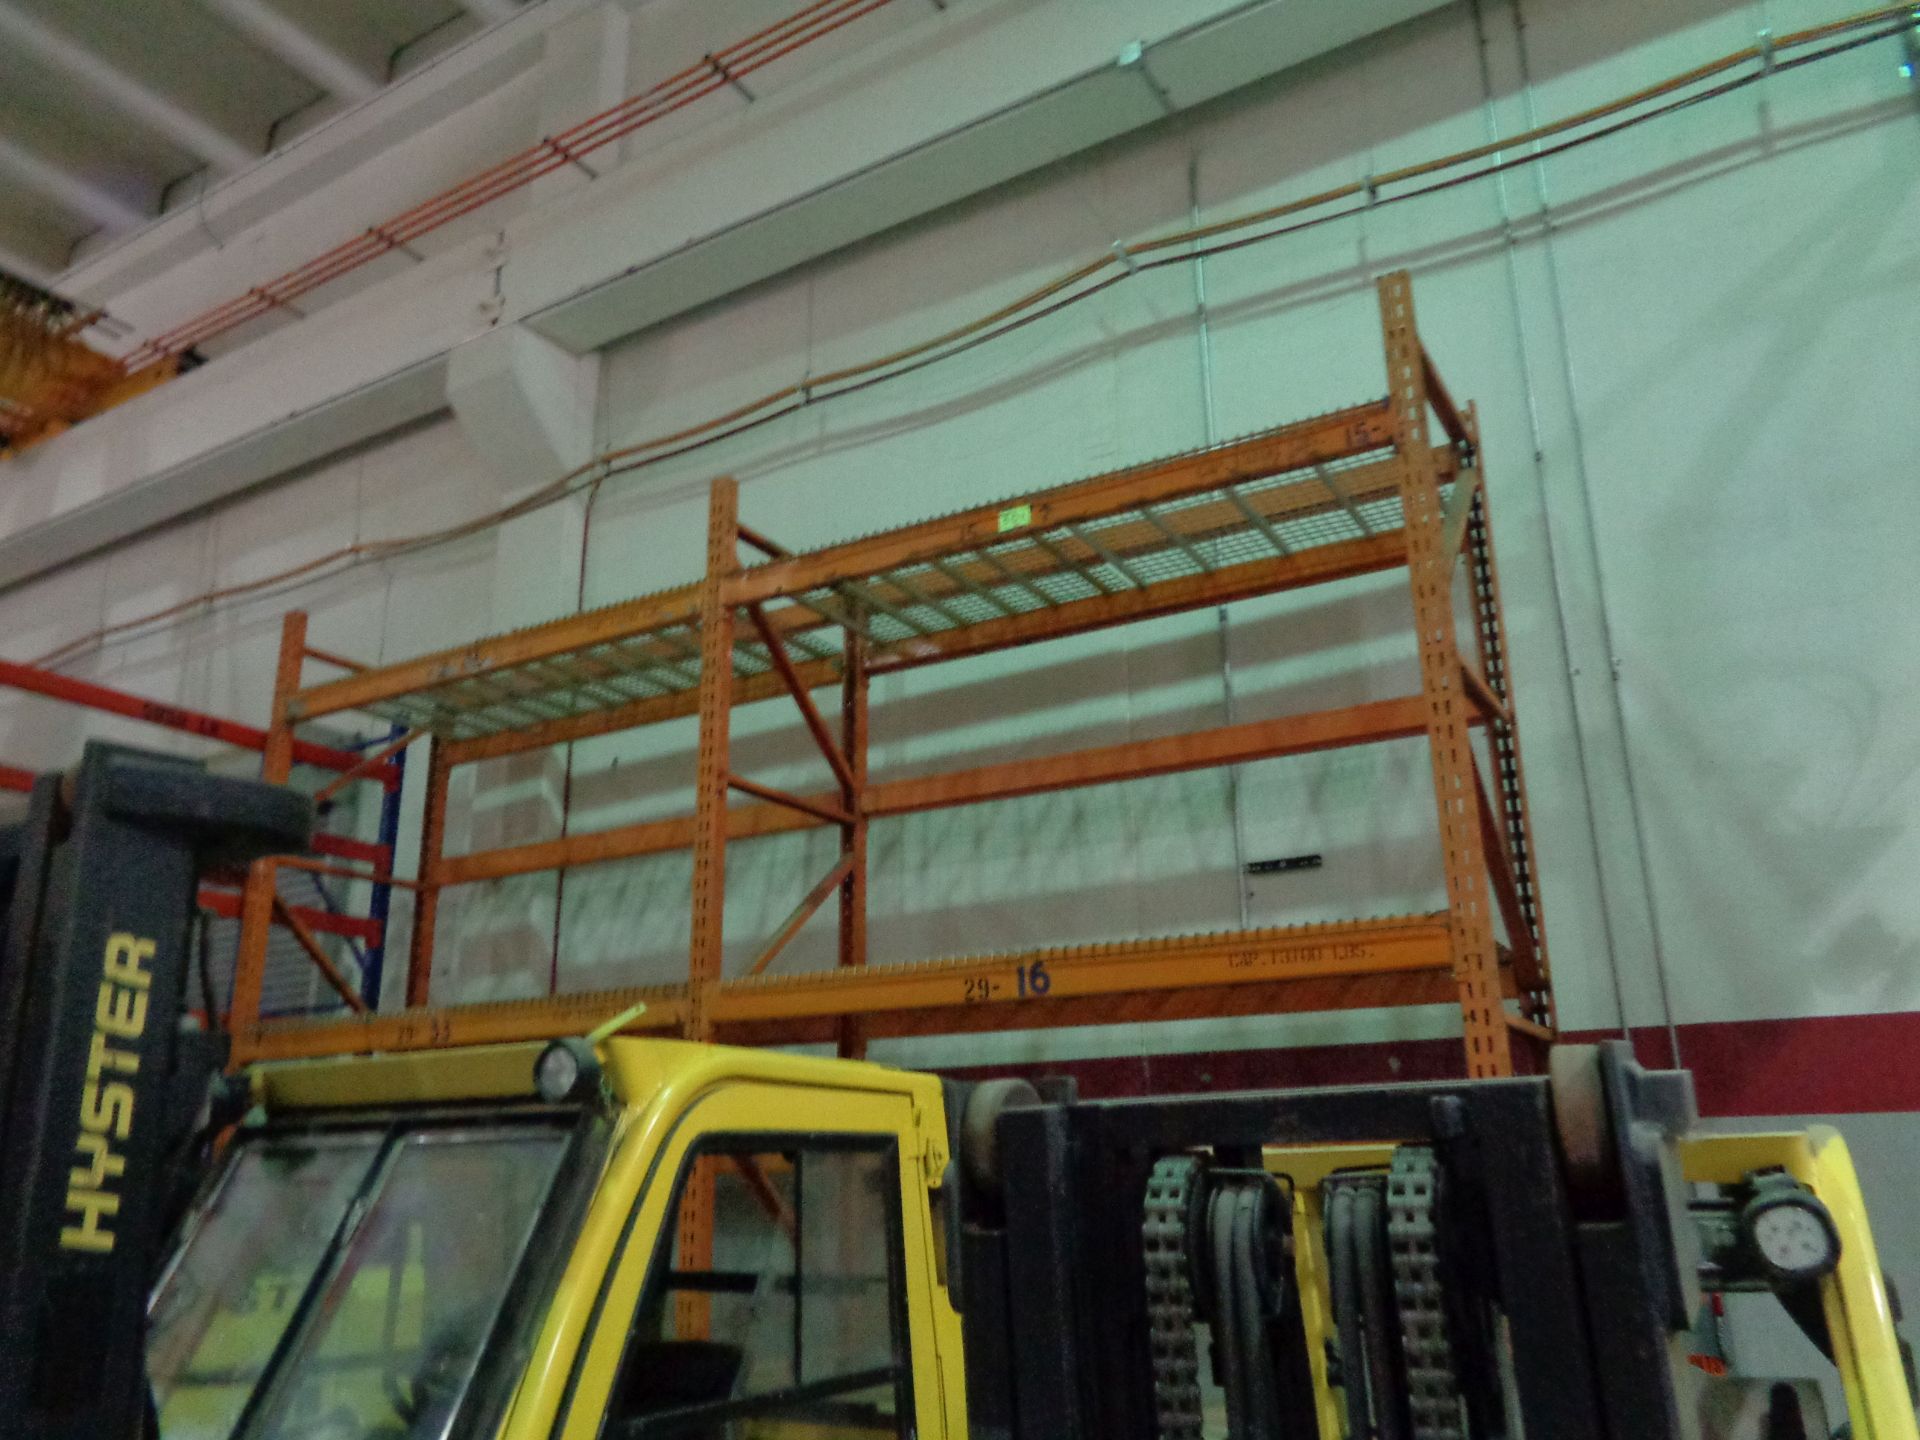 SECTIONS 42" X 108" X 16' HIGH PALLET RACK WITH WIRE DECKING, (3) SHELVES